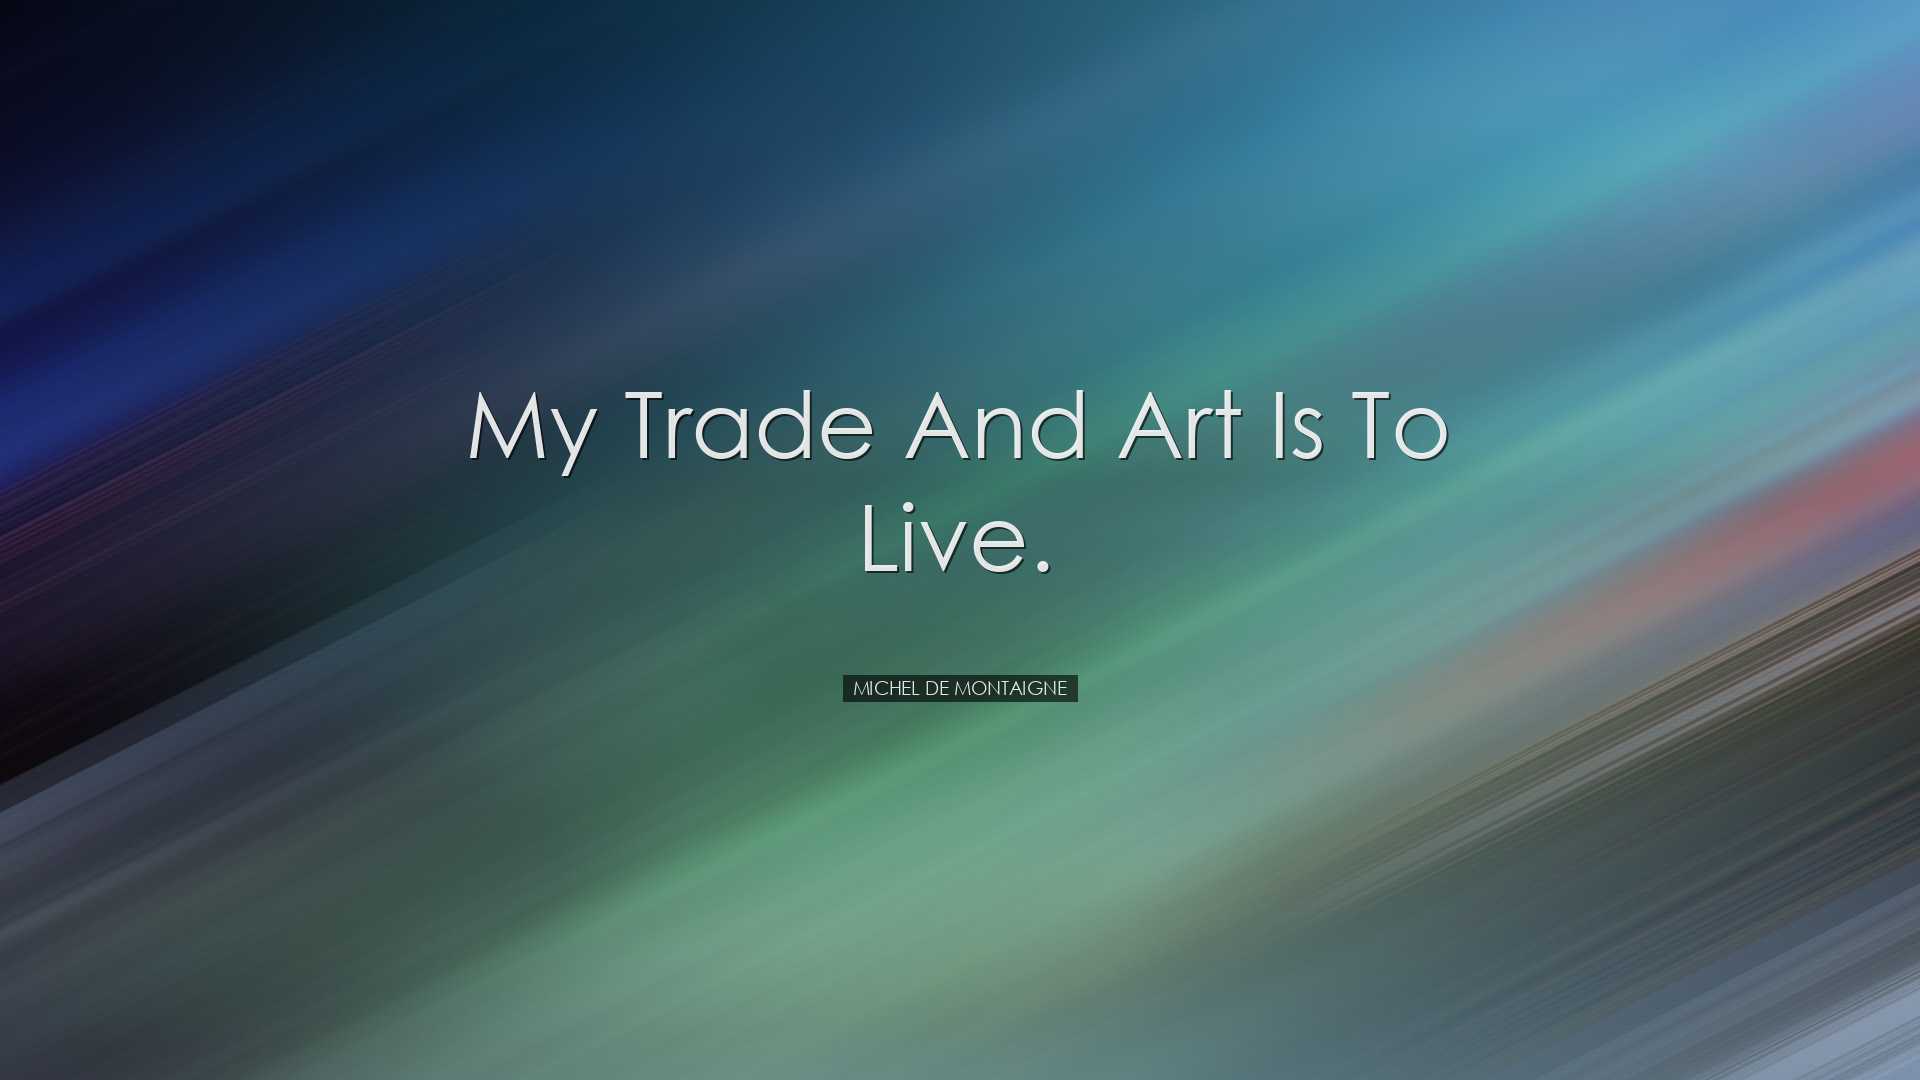 My trade and art is to live. - Michel de Montaigne